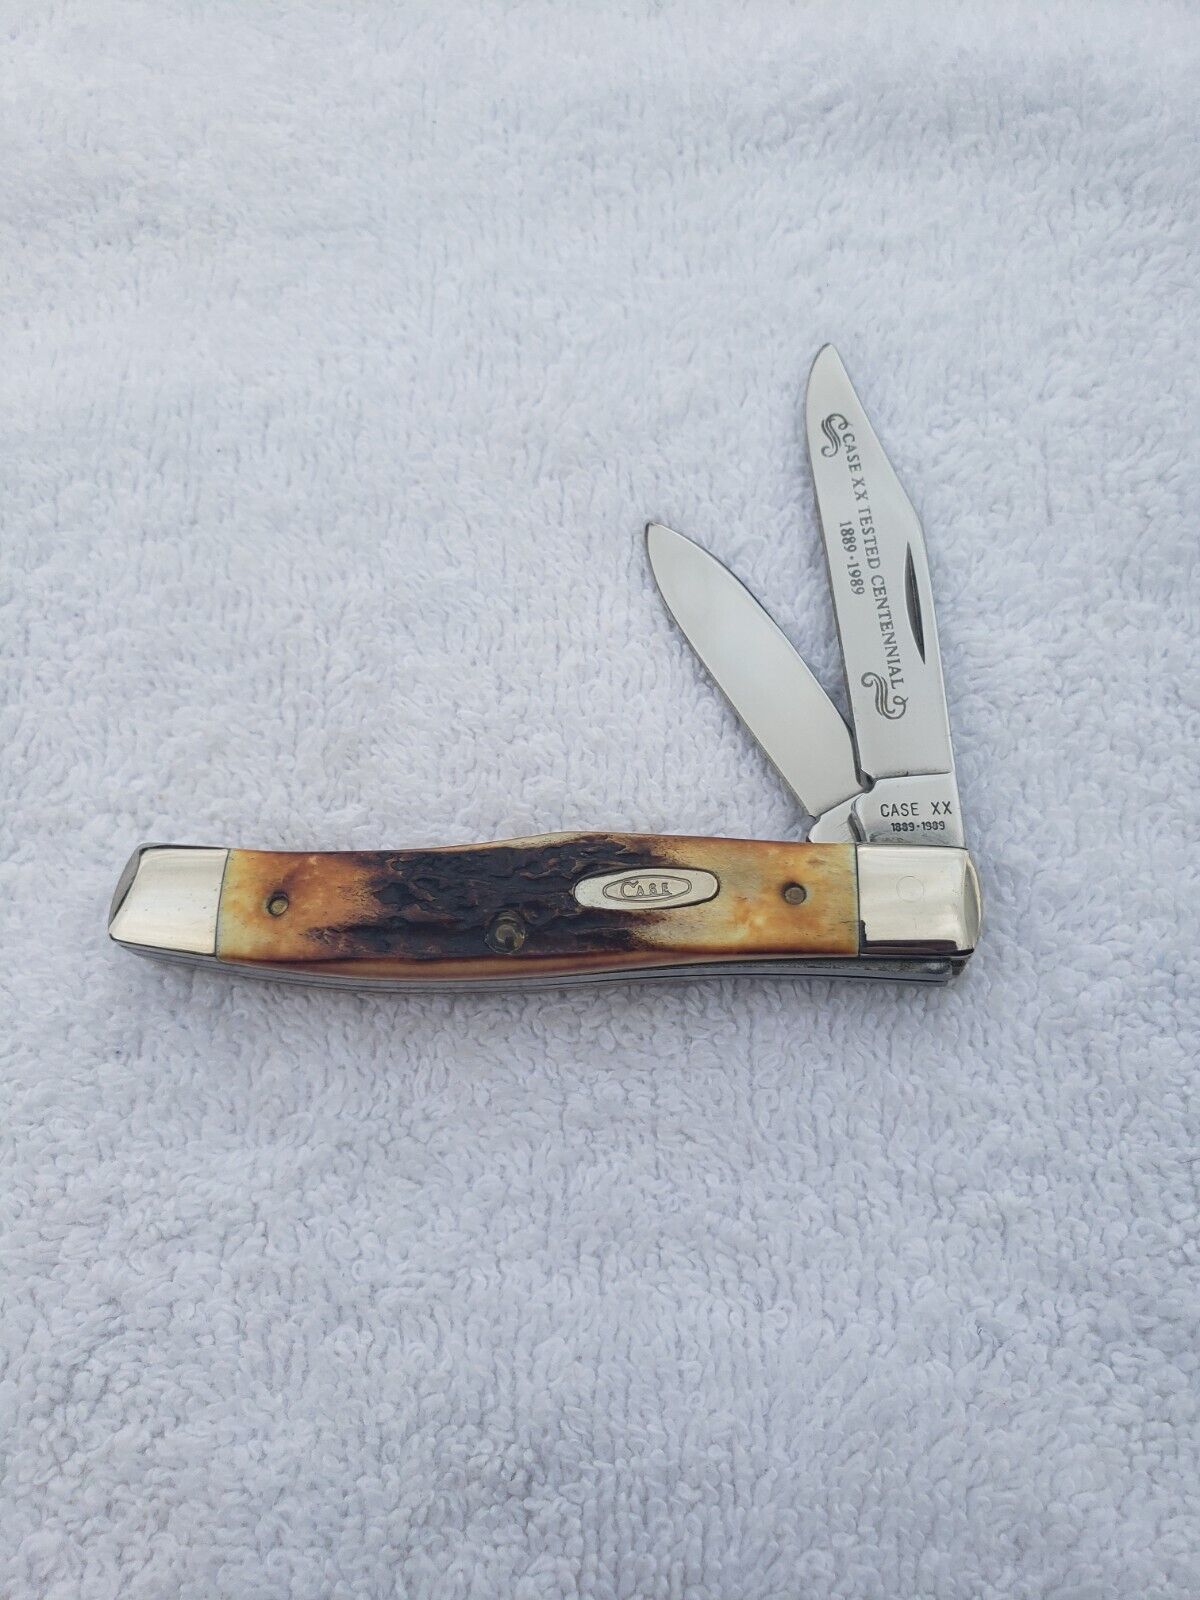 1989 Case xx USA Jack Knife #52032 Stag Handle Case XX Tested Centennial Set New